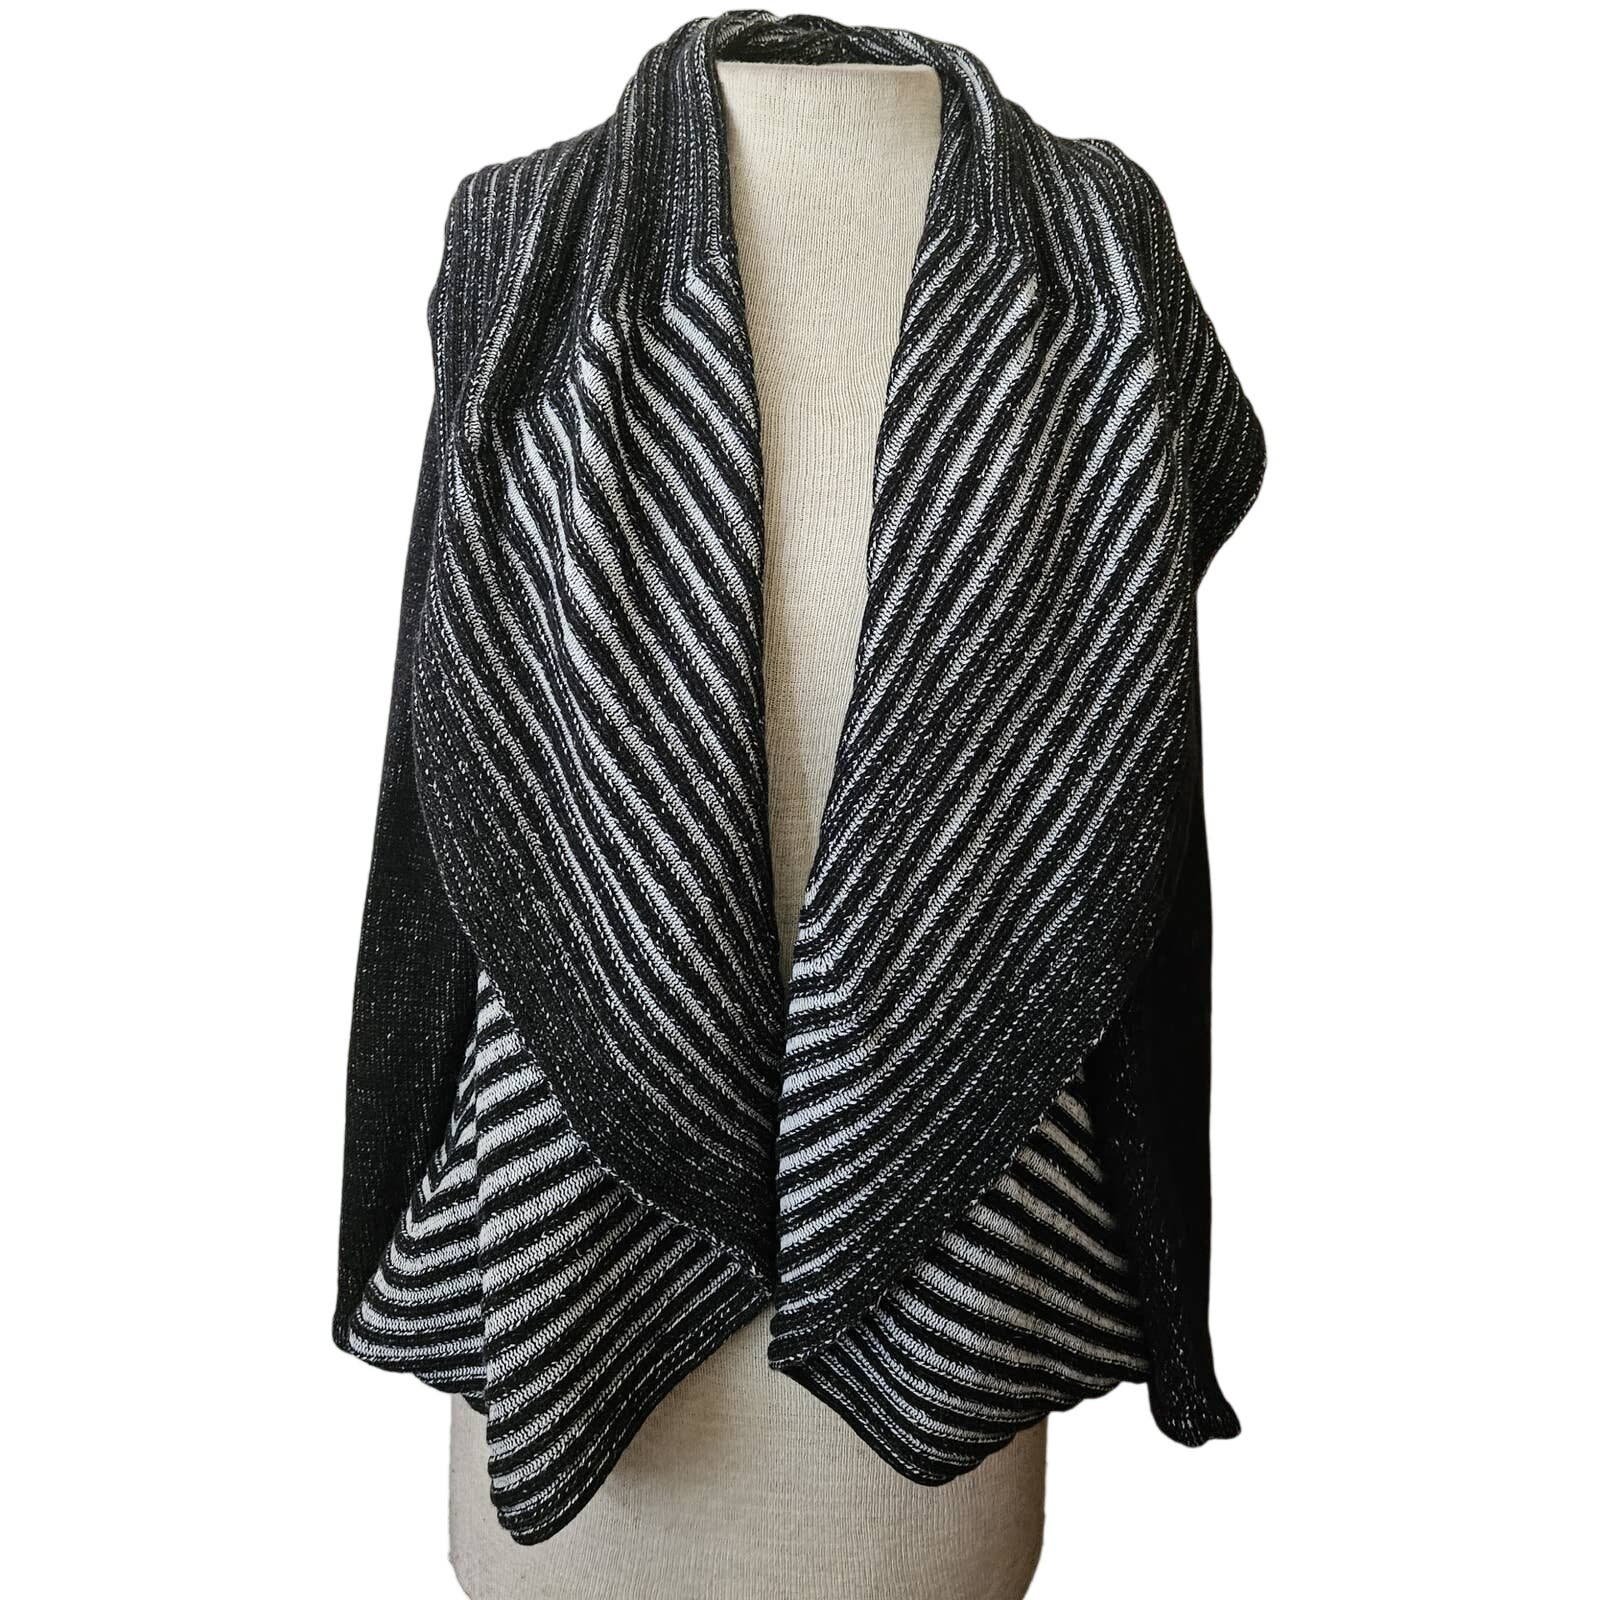 Gorgeous Black and Grey Striped Cardigan Sweater Size L